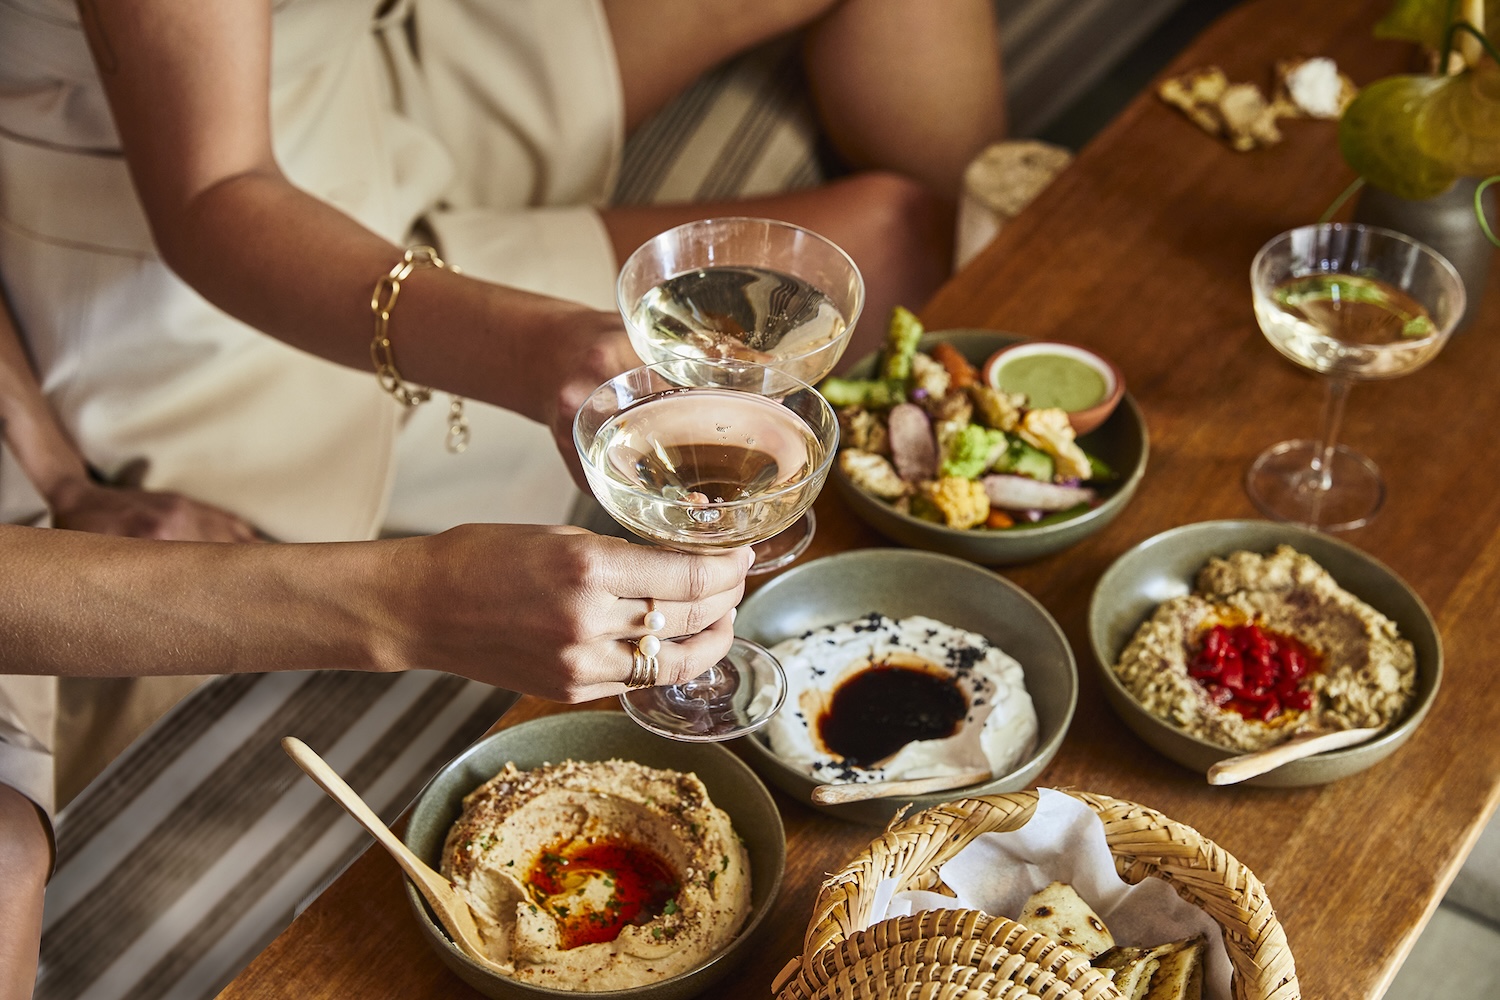 plates of hummus, woman holding two glasses of wine